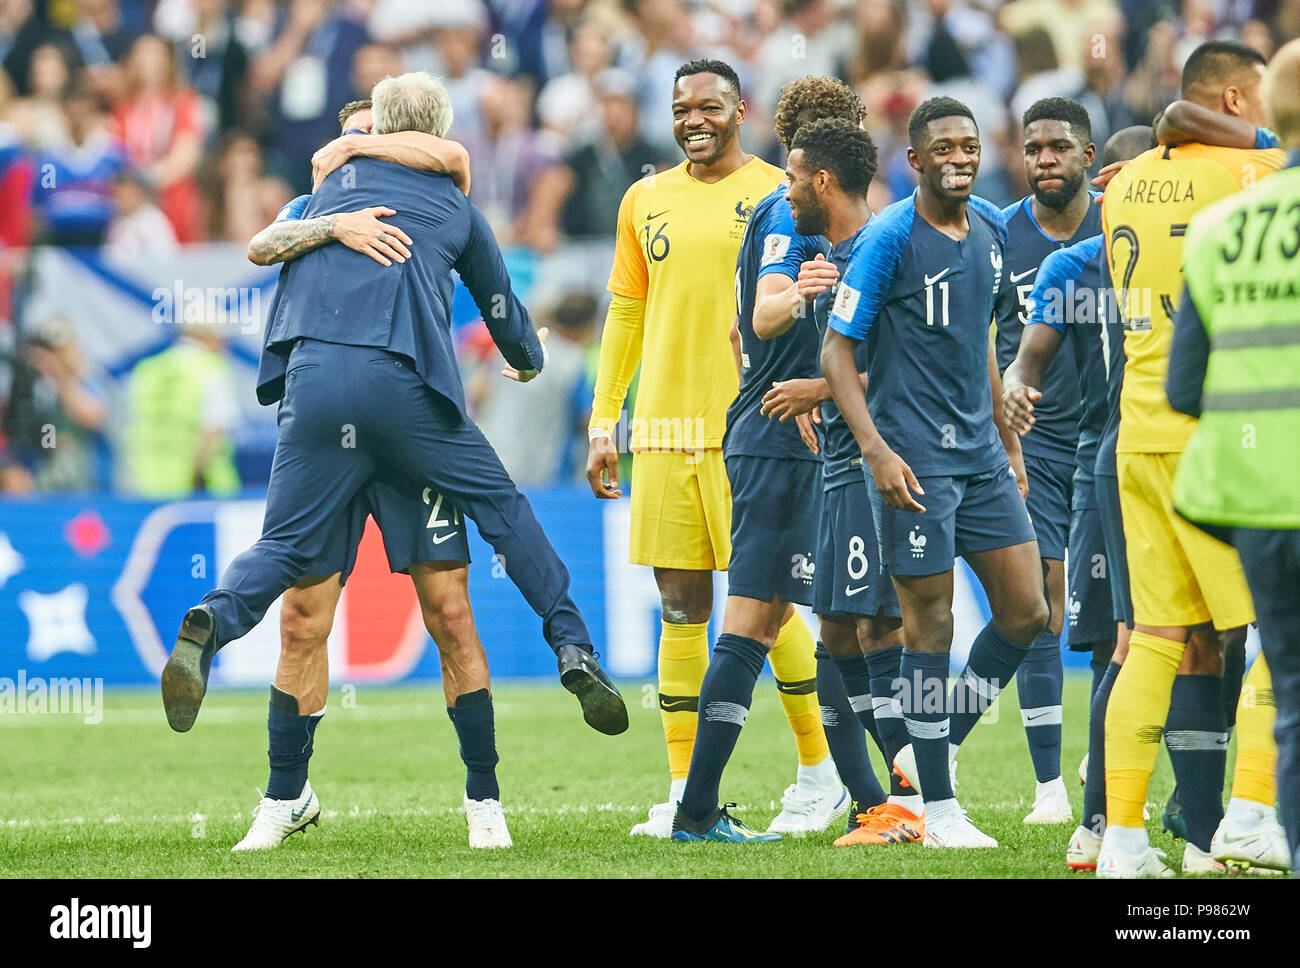 Moscow, Russia. 15th July 2018. France - Croatia, Soccer, Moscow, July 15, 2018 Didier DESCHAMPS, FRA headcoach,  lifted by Lucas HERNANDEZ, FRA 21 at the Winners ceremonym Ousmane DEMBELE, FRA 11 Steve MANDANDA, FRA 16 goalkeeper,  FRANCE  - CROATIA 4-2 Football FIFA WORLD CUP 2018 RUSSIA, Final, Season 2018/2019,  July 15, 2018 in Luzhniki Stadium Moscow, Russia. © Peter Schatz / Alamy Live News Stock Photo